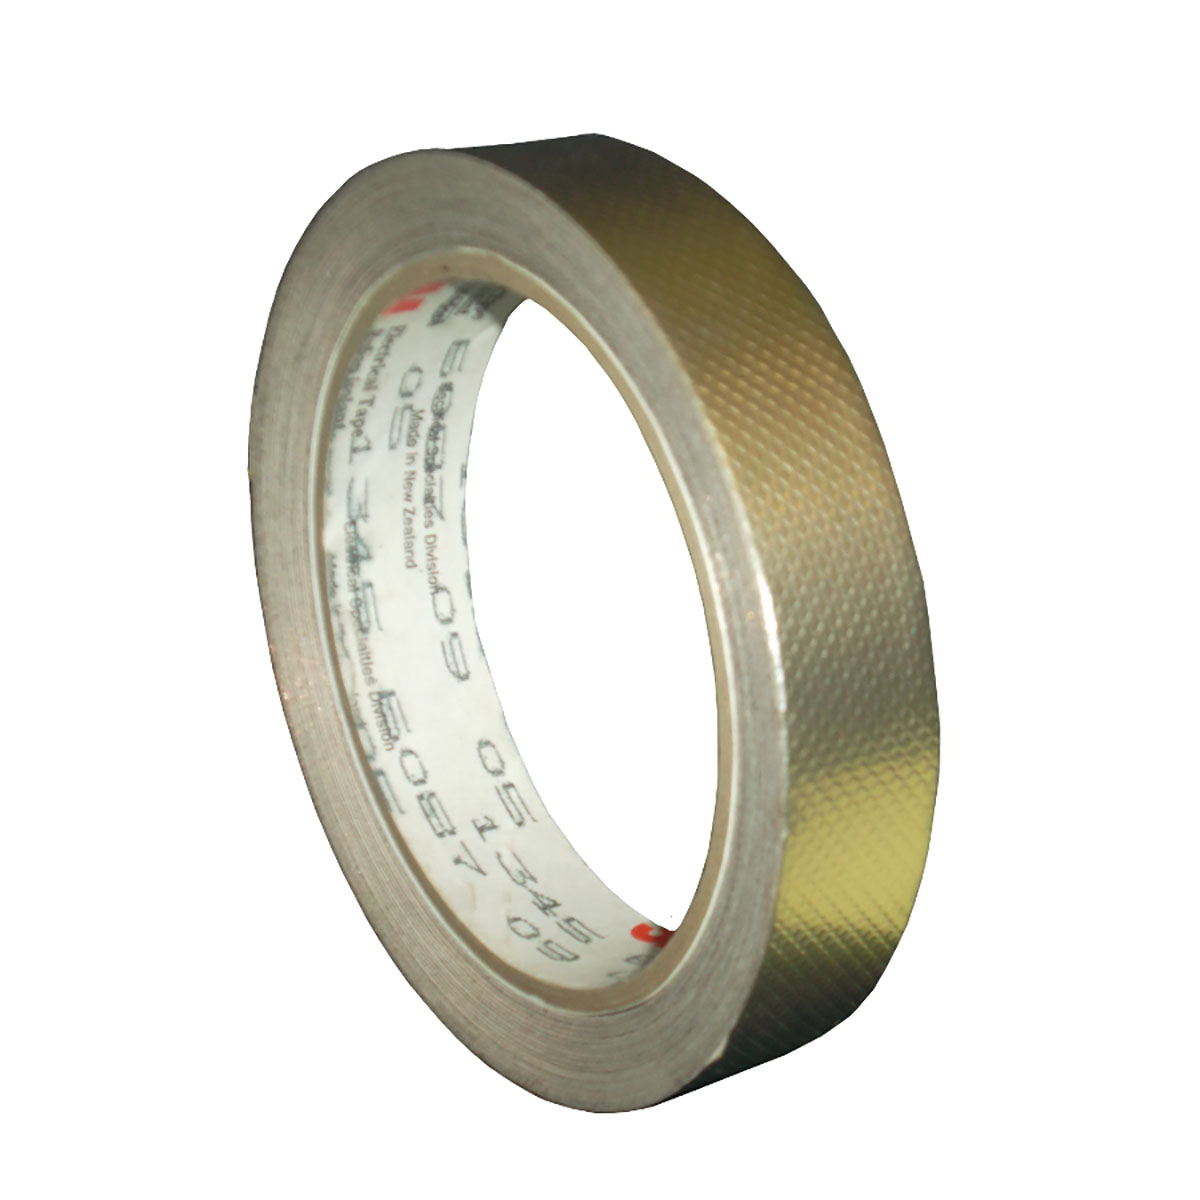 3M 1345 Embossed Tin-Plated Copper Foil Tape